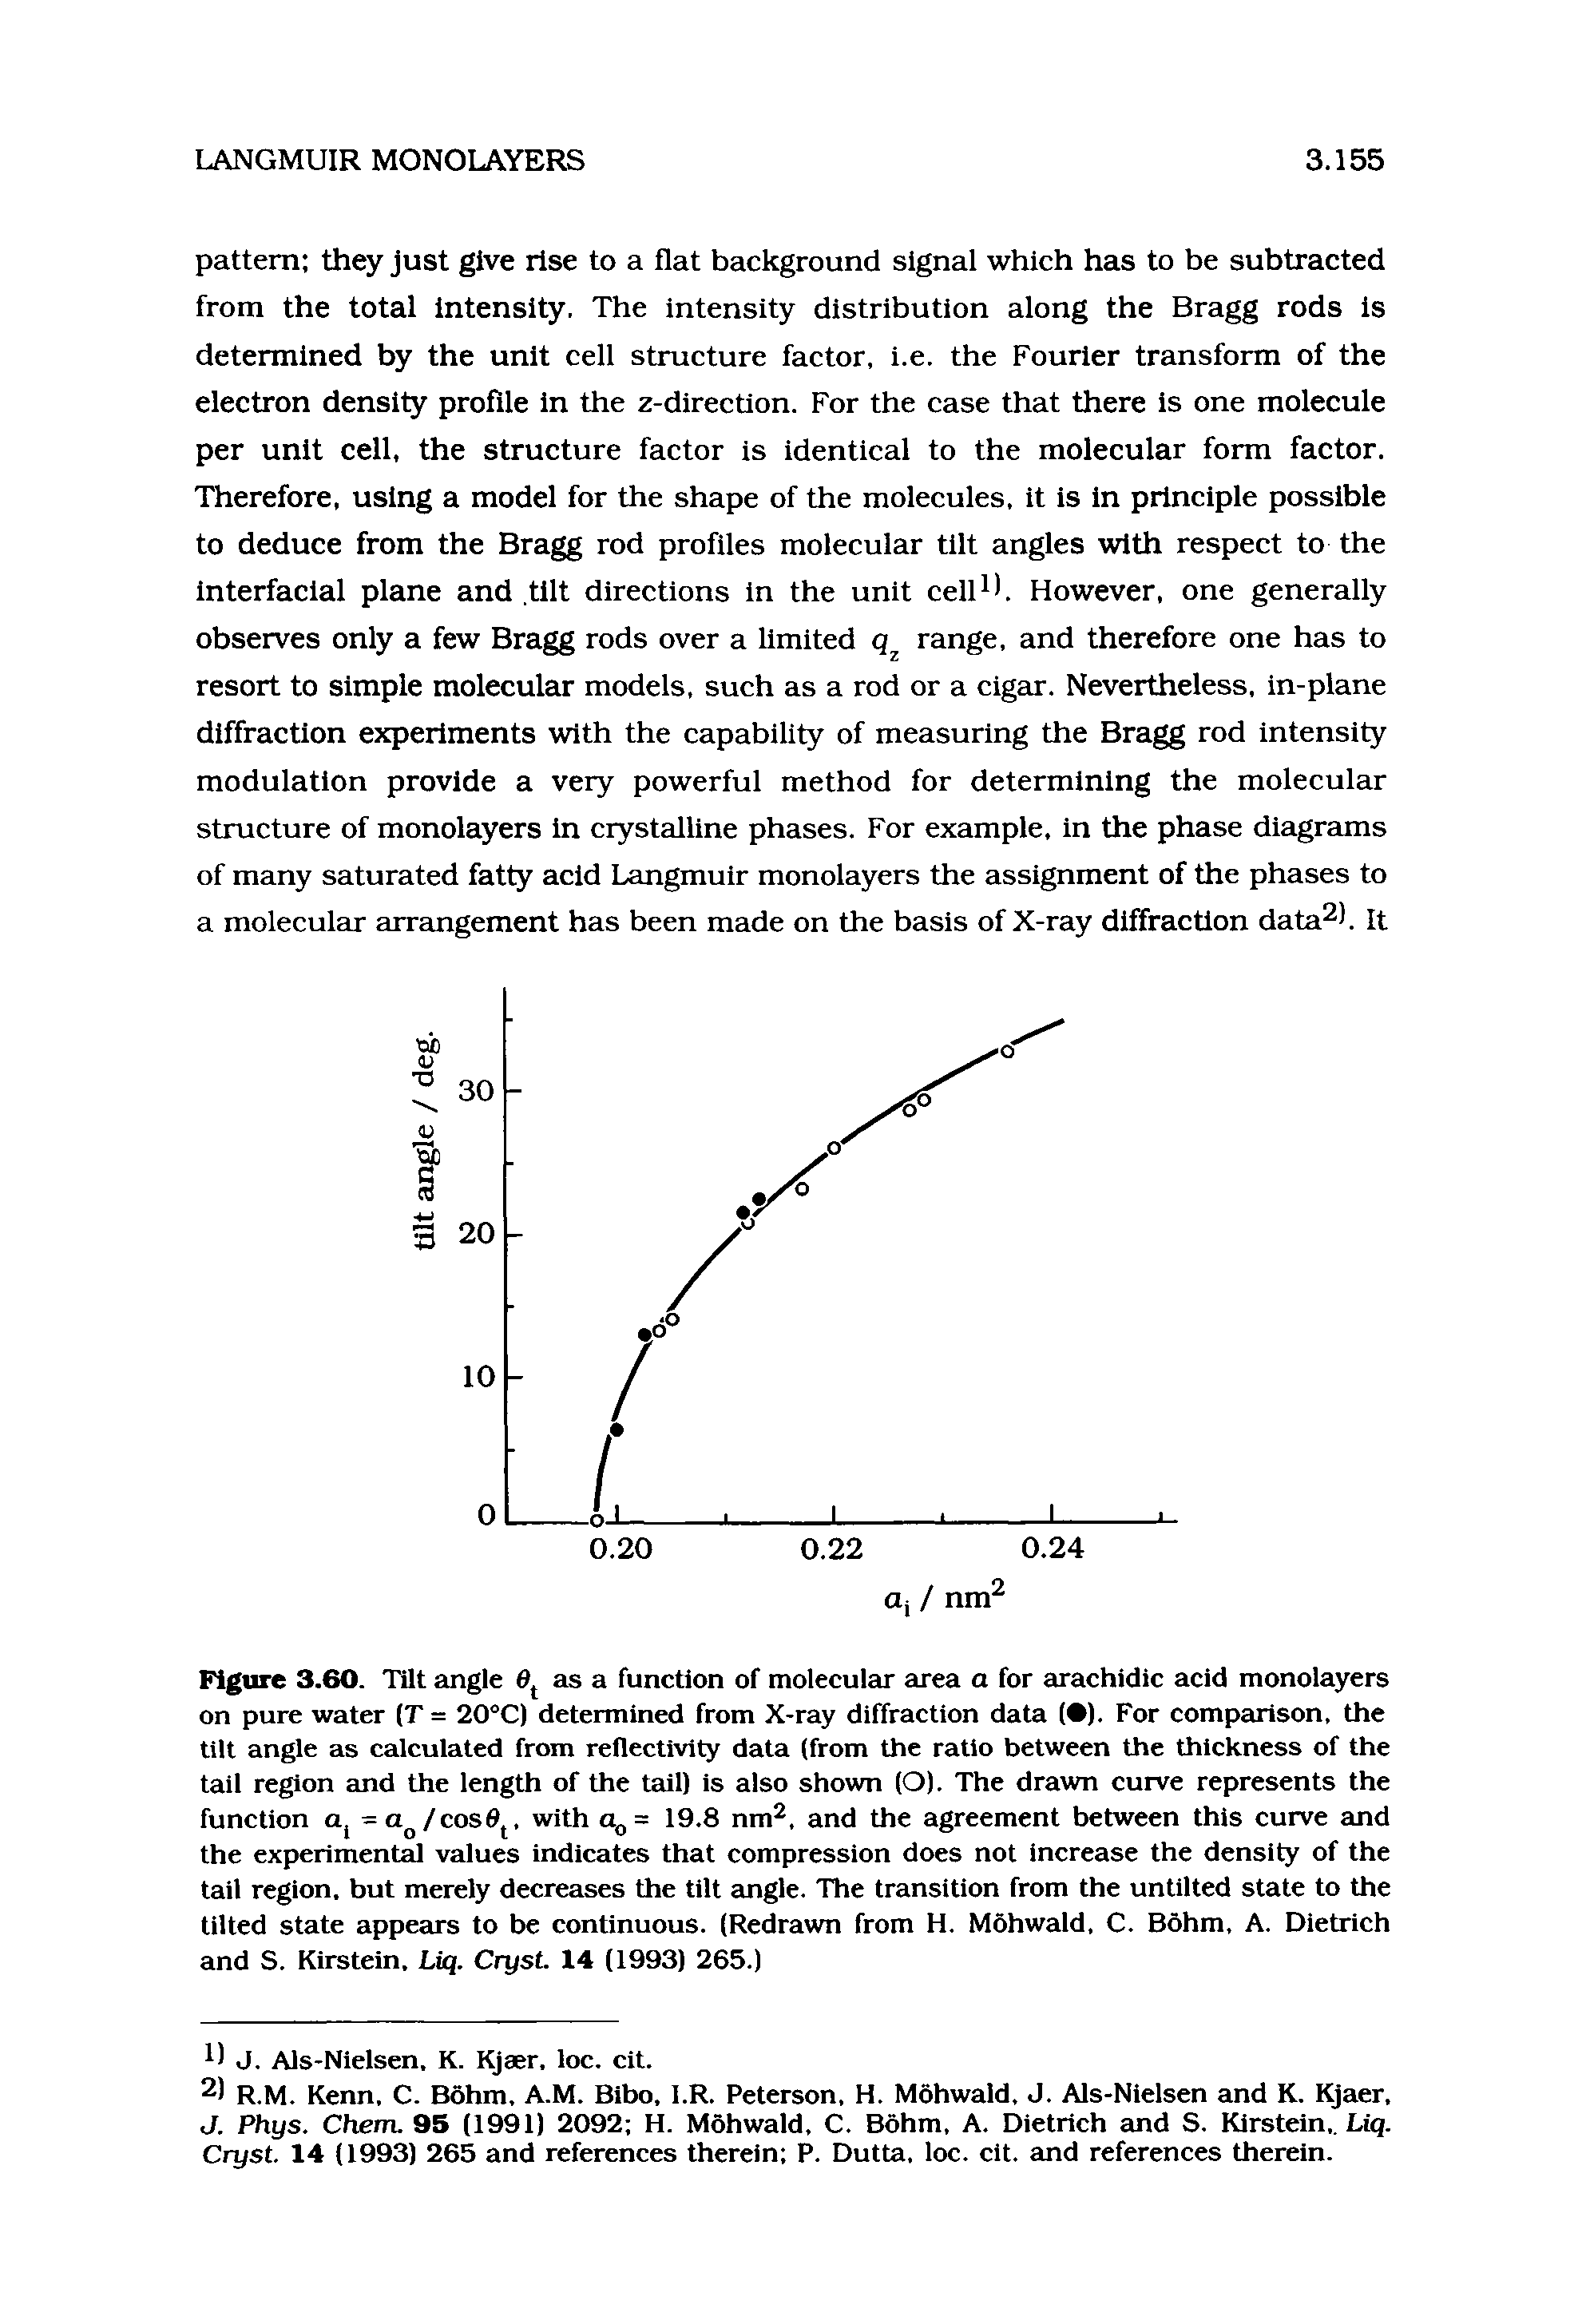 Figure 3.60. Tilt angle 0 as a function of molecular area a for arachidic acid monolayers on pure water (T = 20°C) determined from X-ray diffraction data ( ). For comparison, the tilt angle as calculated from reflectivity data (from the ratio between the thickness of the tail region and the length of the tall) is also shown (O). The drawn curve represents the function =a /cos0, with a = 19,8 nm, and the agreement between this curve and the experiment values indicates that compression does not increase the density of the tail region, but merely decreases the tilt angle. The transition from the untilted state to the tilted state appears to be continuous. (Redrawn from H. Mohwald, C. Bohm, A. Dietrich and S. Klrstein, Liq. Cryst. 14 (1993) 265.)...